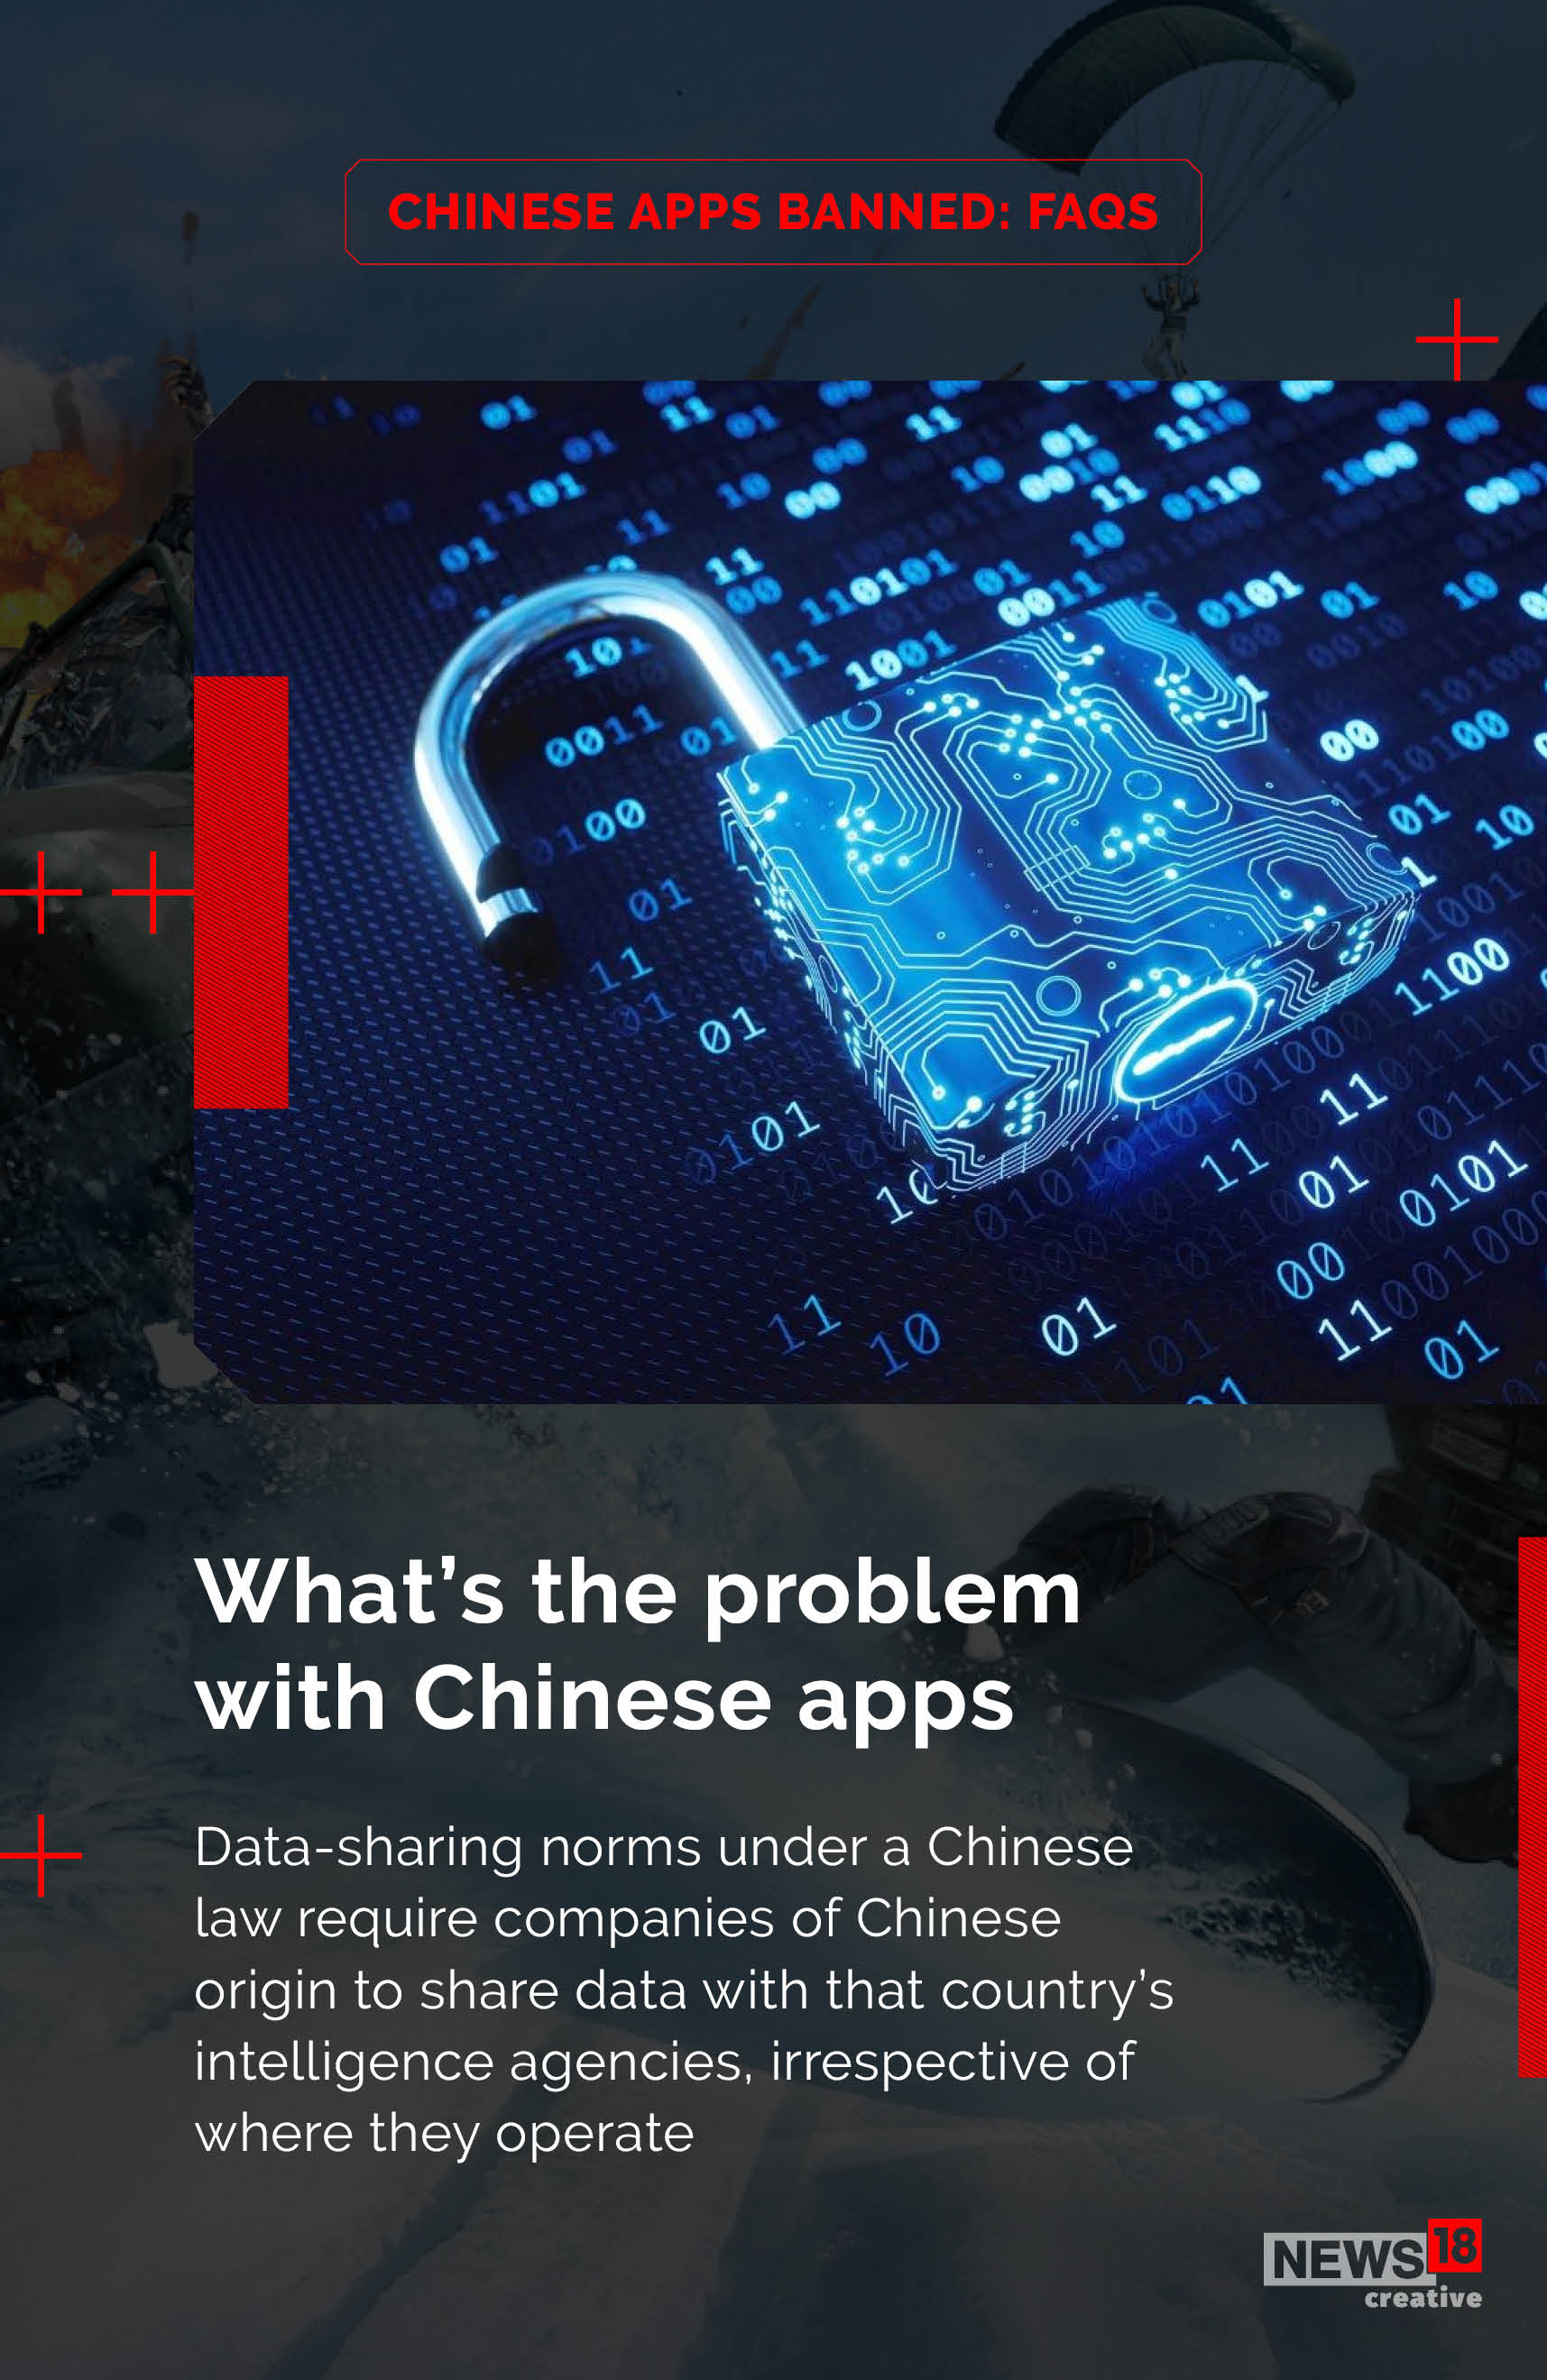 FAQs: All you wanted to know about the Chinese app ban